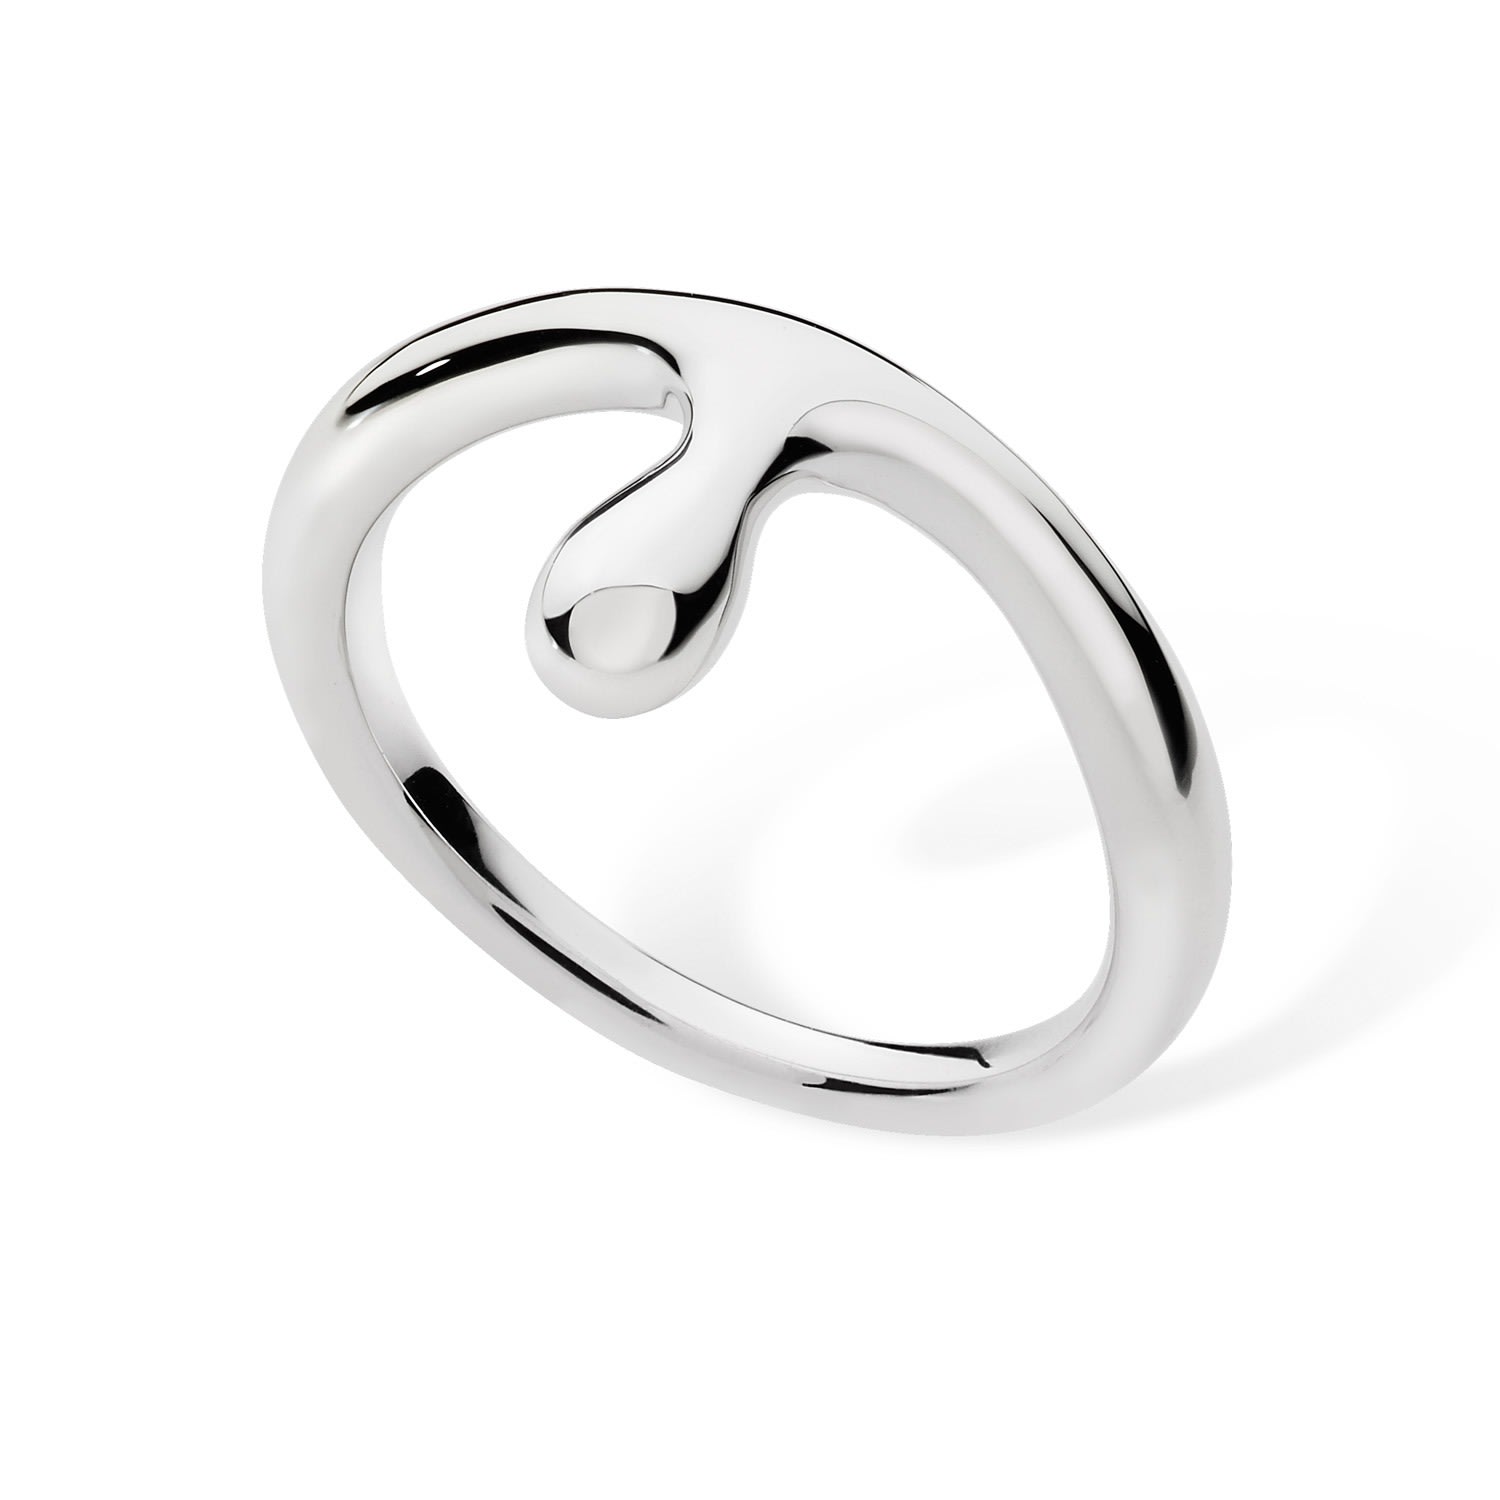 Lucy Quartermaine Women's Silver Dripping Ring In Metallic